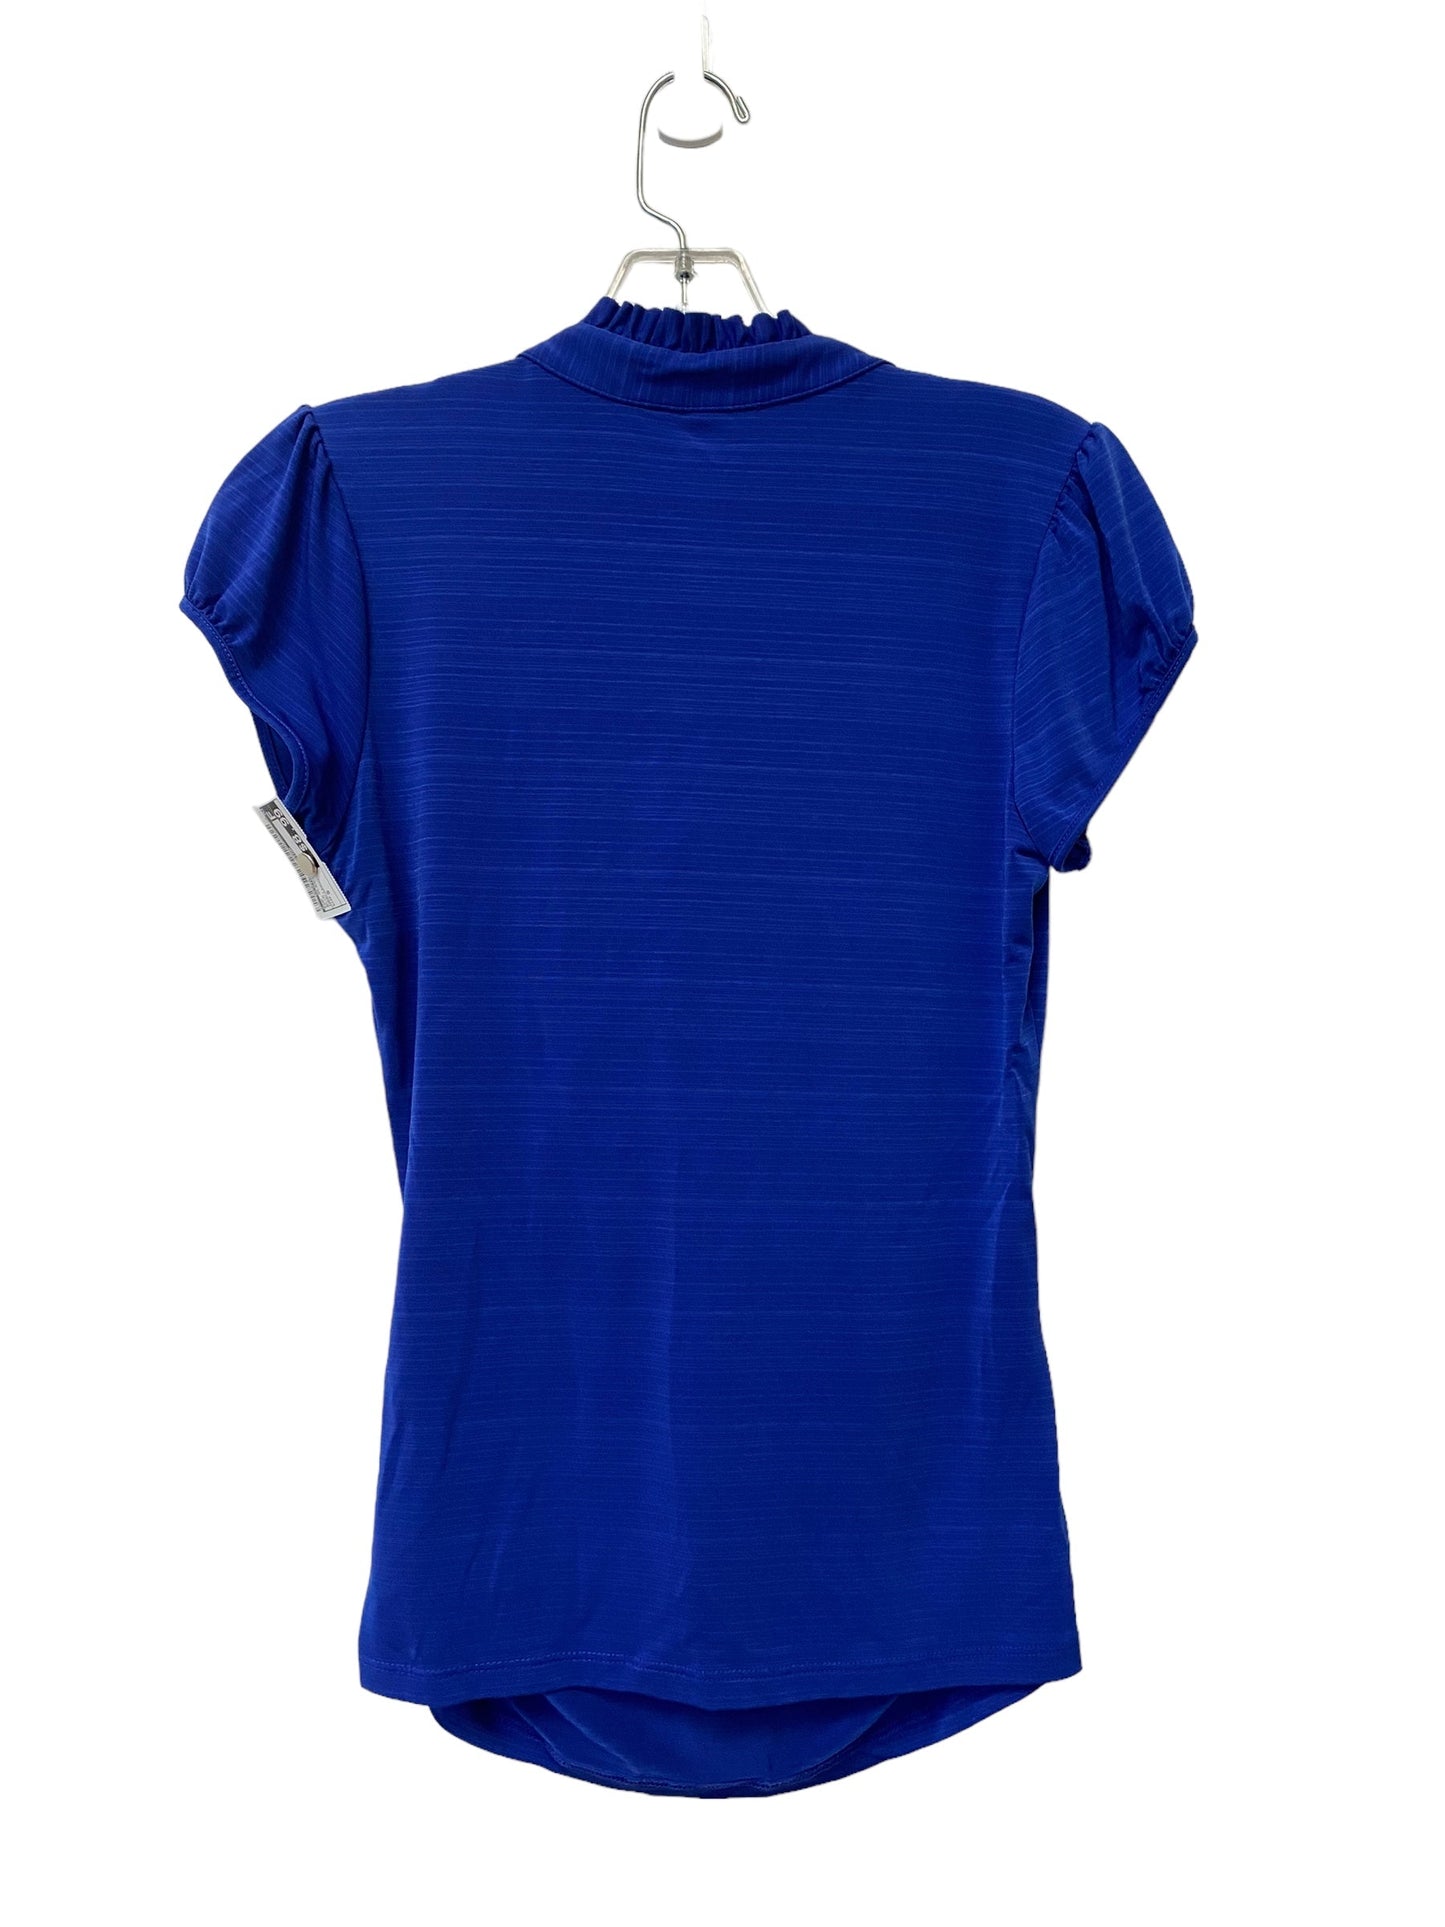 Blue Top Sleeveless Clothes Mentor, Size S